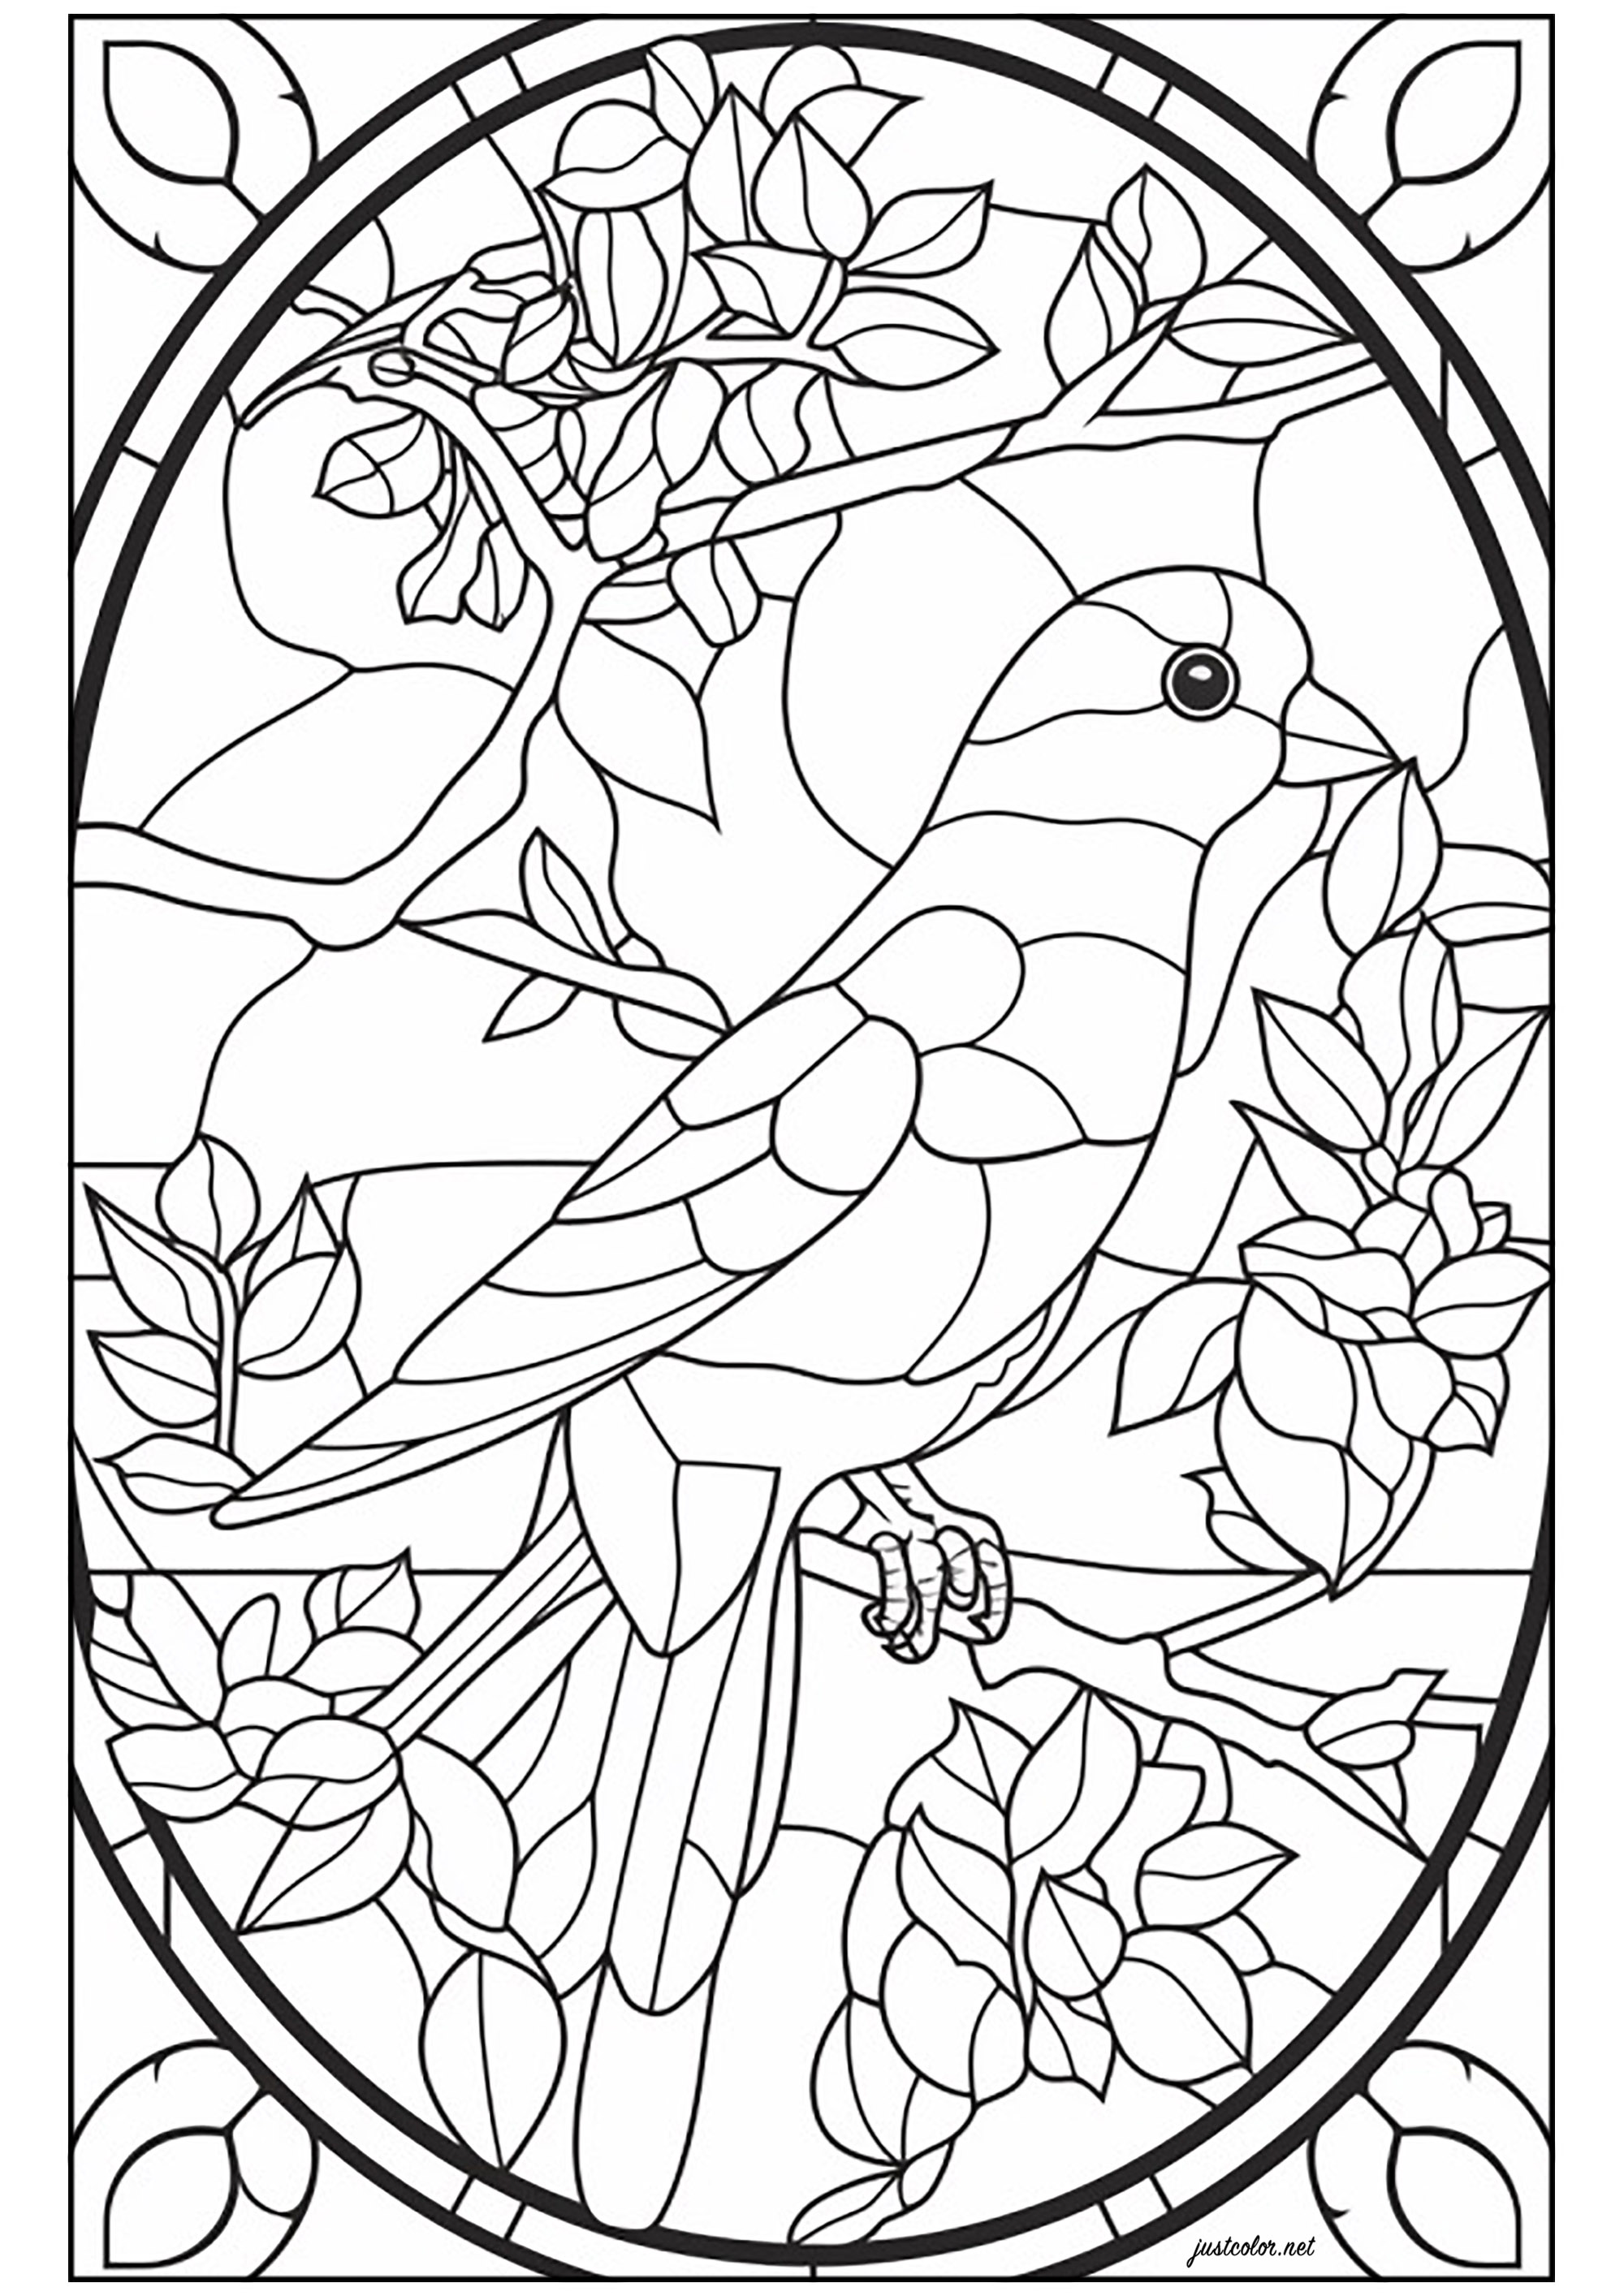 Stained glass window with a beautiful bird. A beautiful cross between a dove and a sparrow